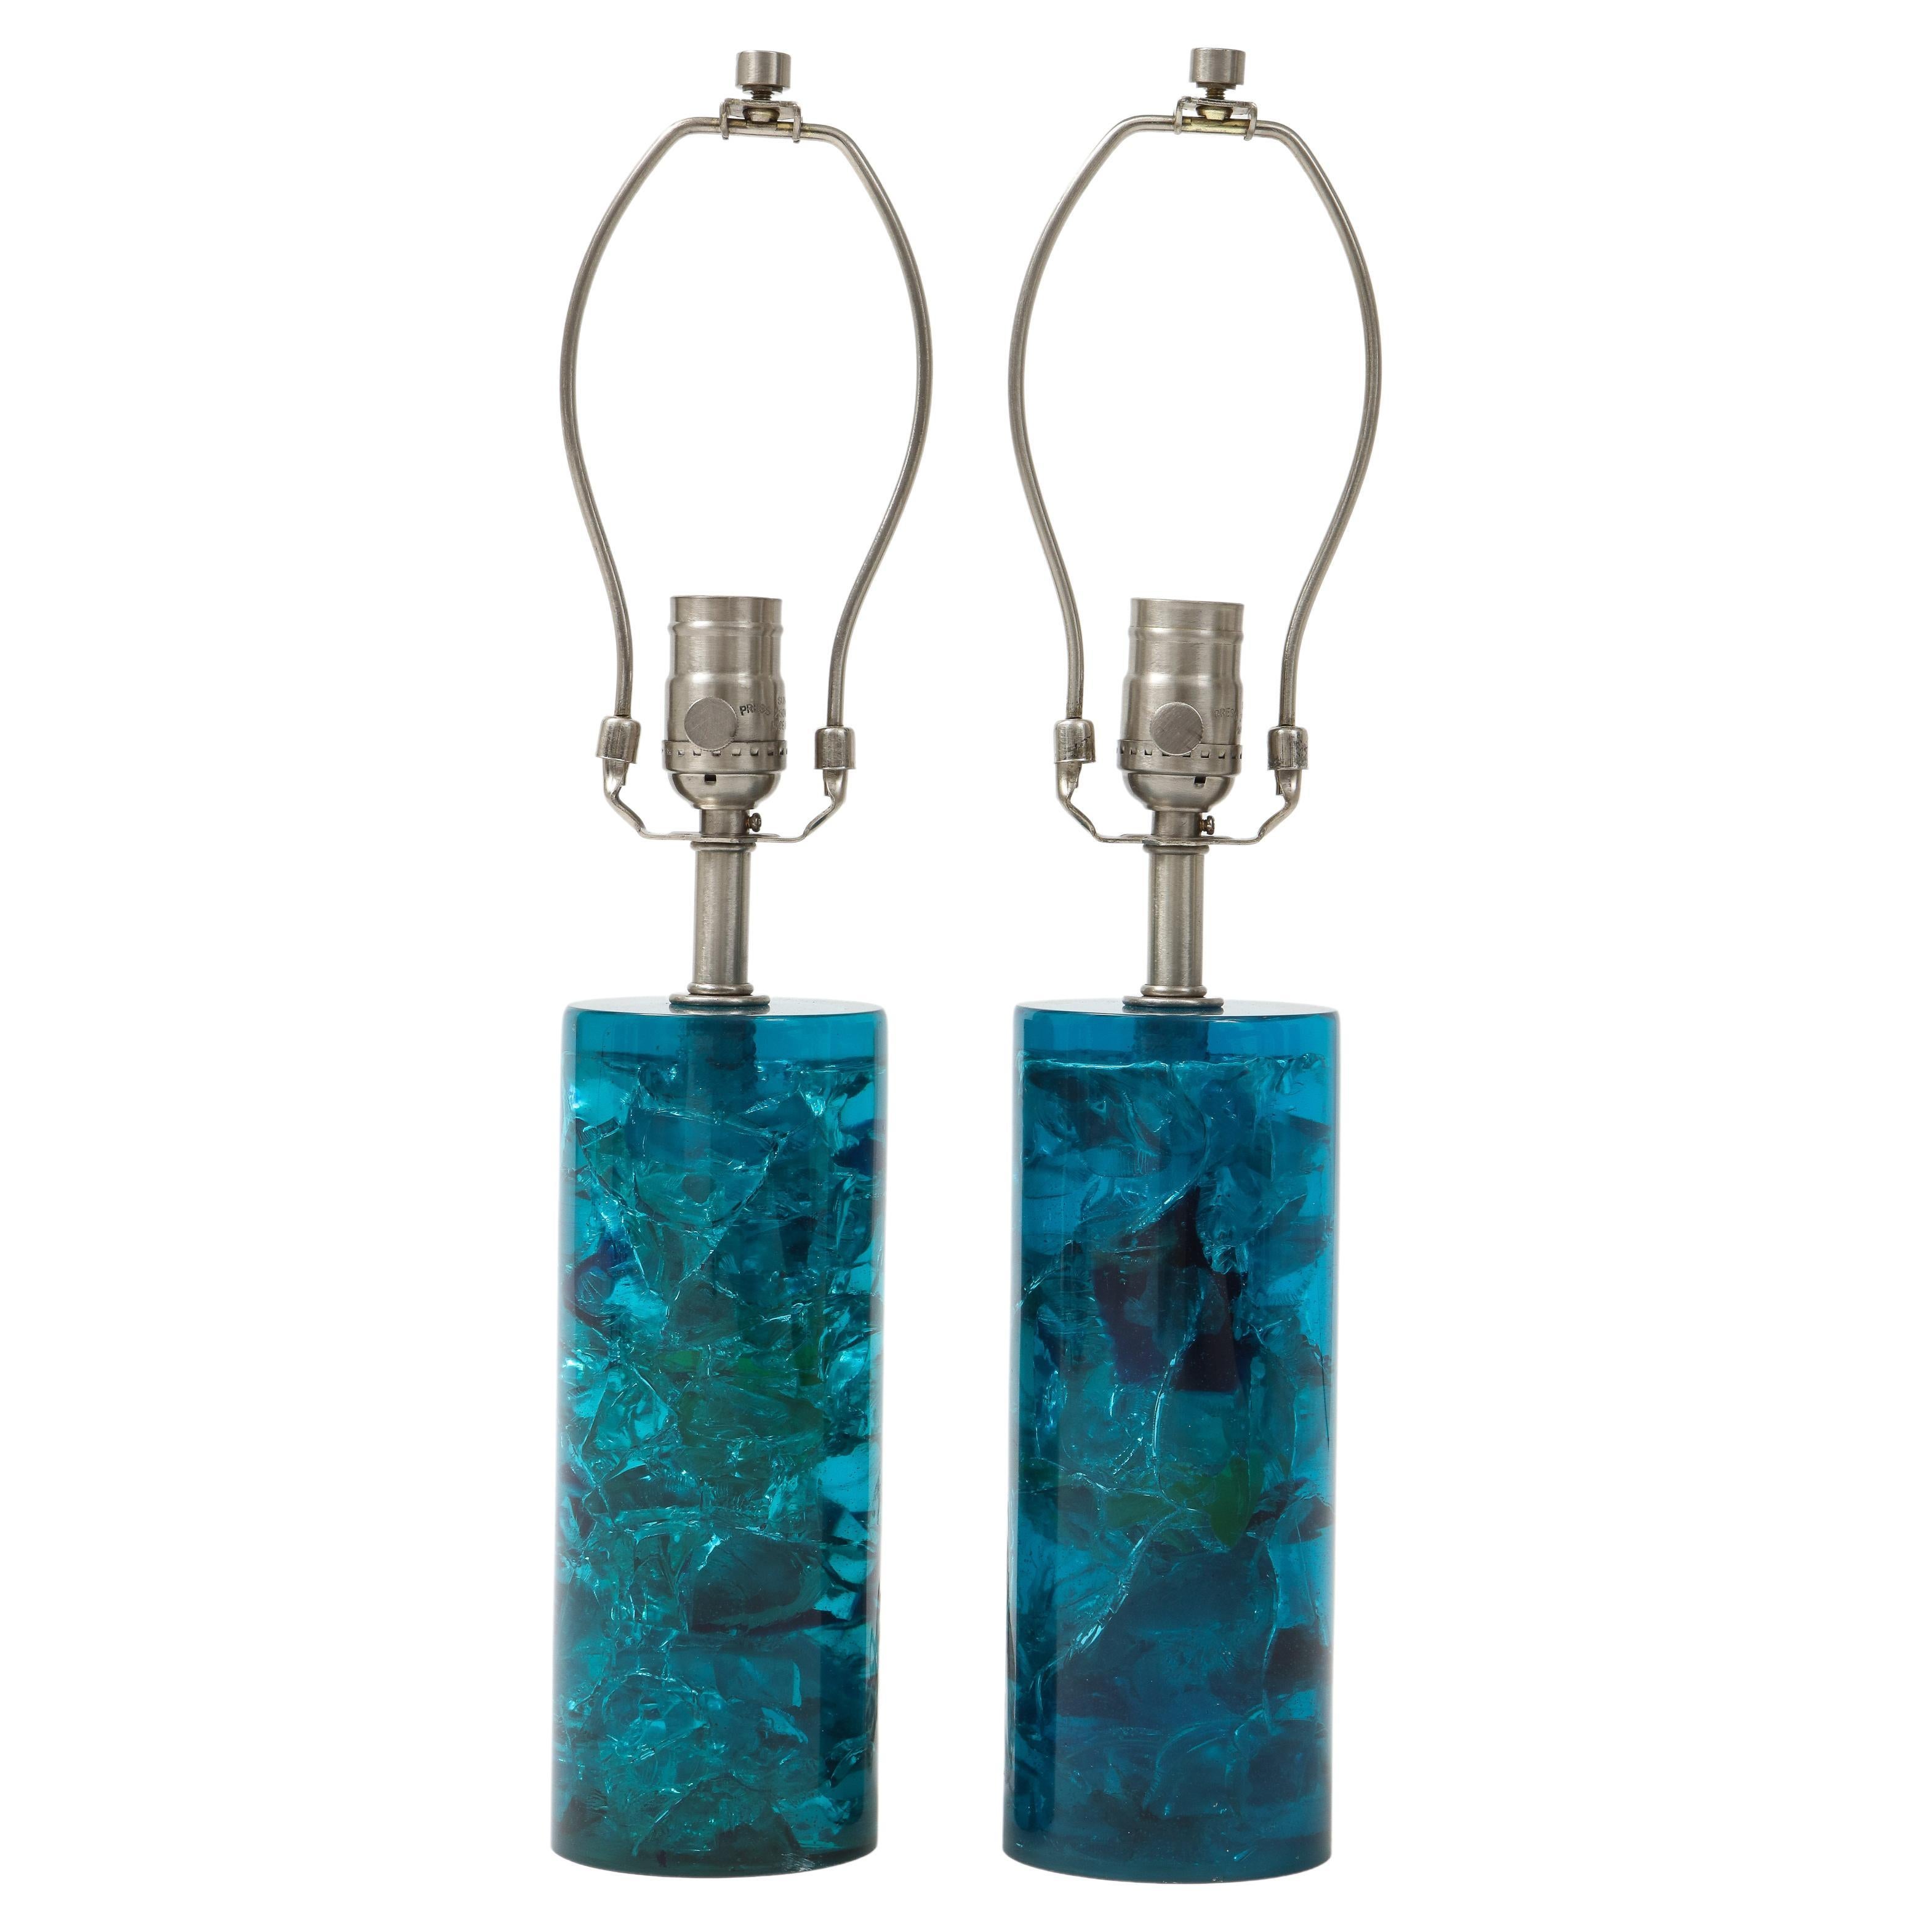 Turquoise Fractal Resin Lamps, Marie Claude Fouquieres